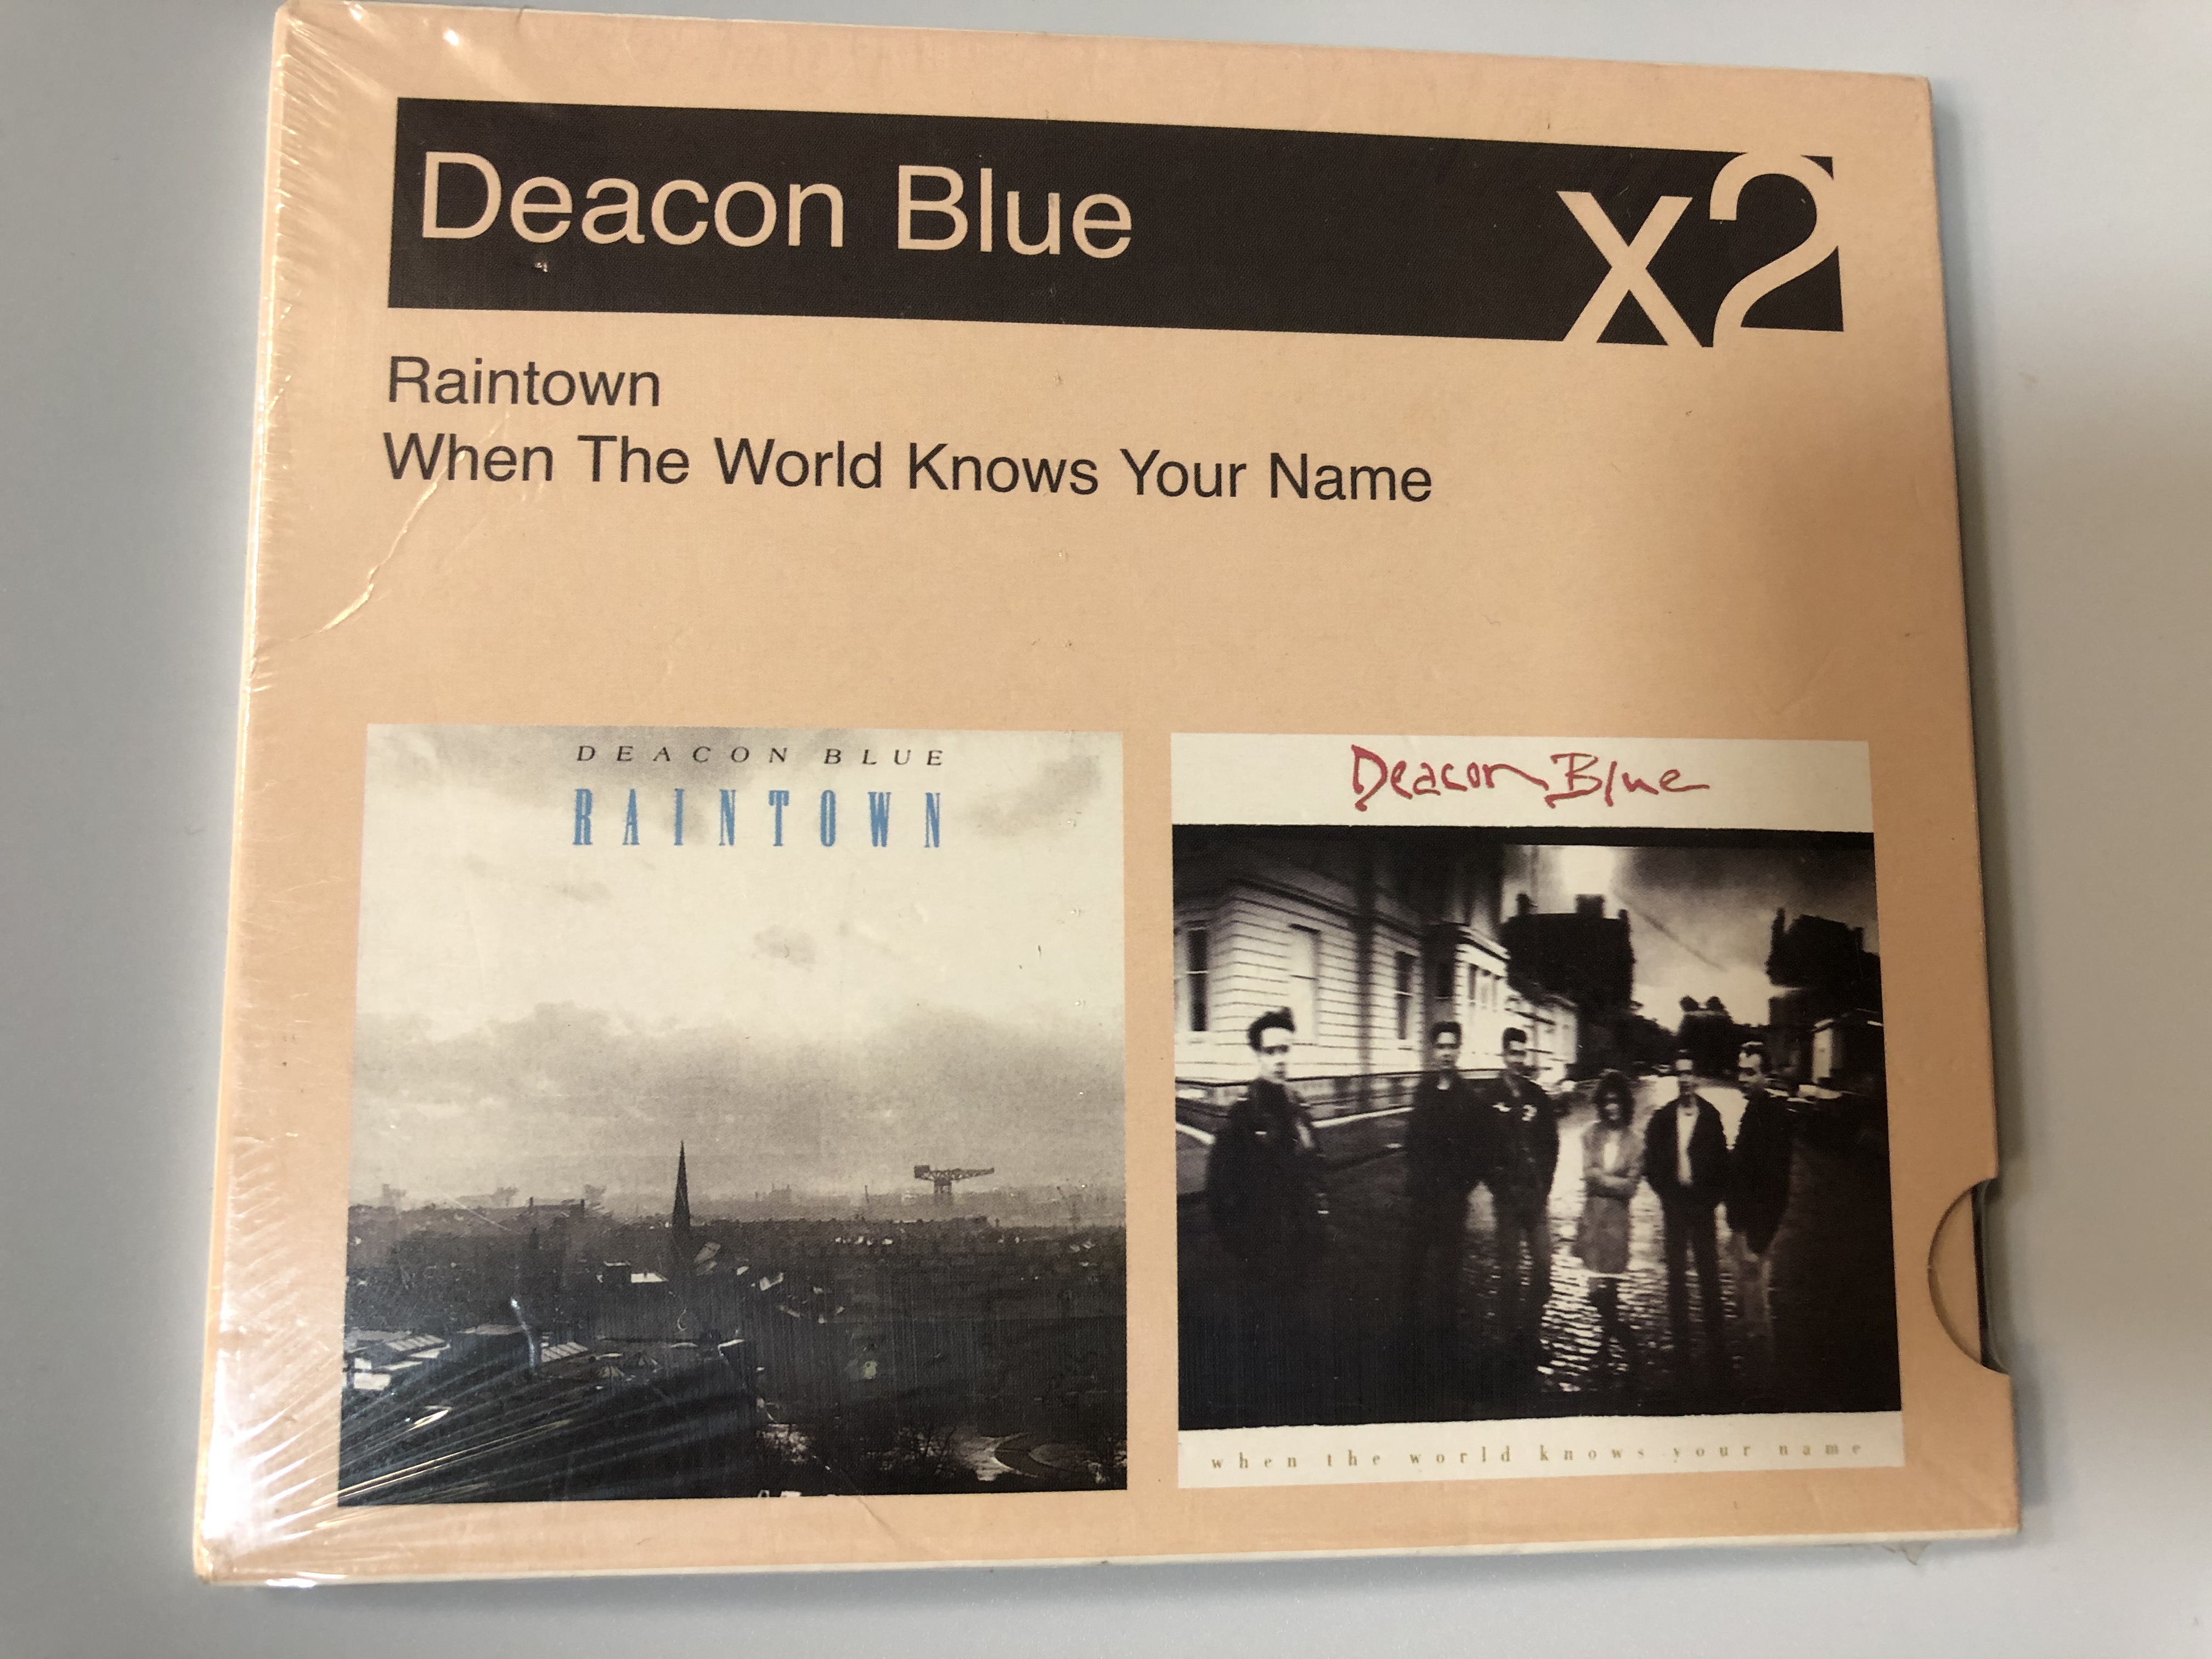 deacon-blue-raintown-when-the-world-knows-your-name-sony-bmg-music-entertainment-2x-audio-cd-2007-886971520521-1-.jpg